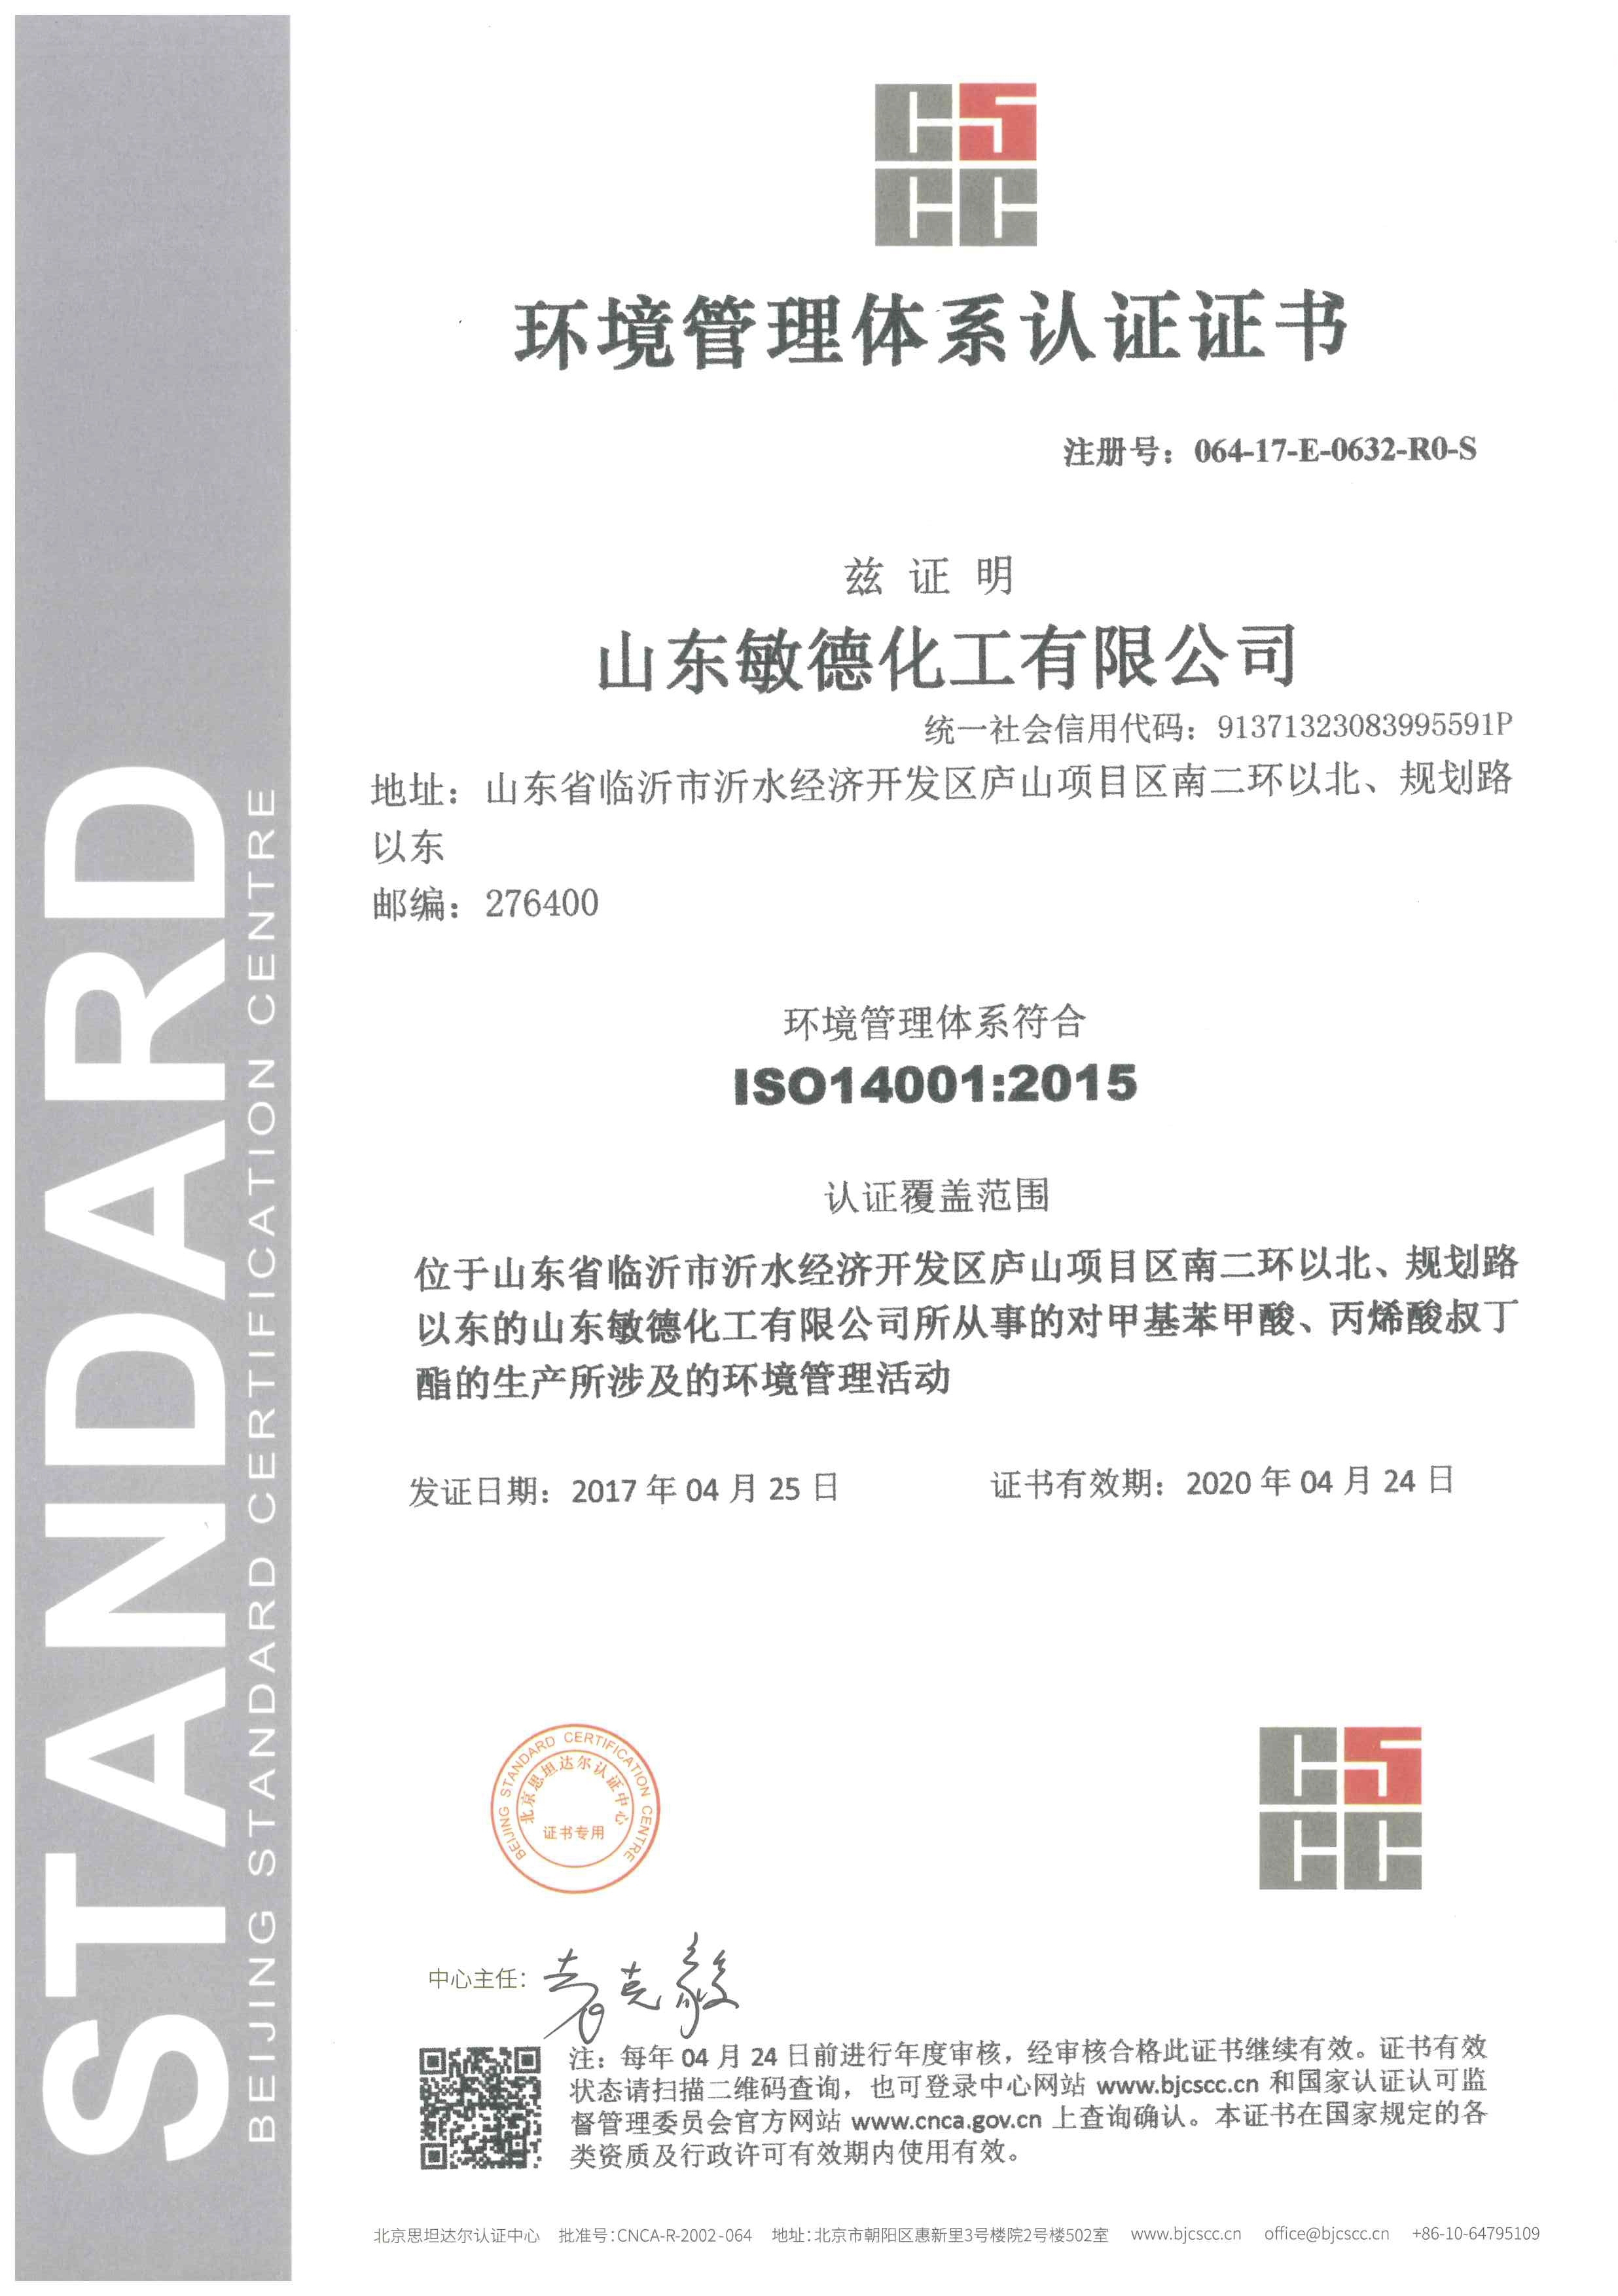 Certificate of environmental management system certification